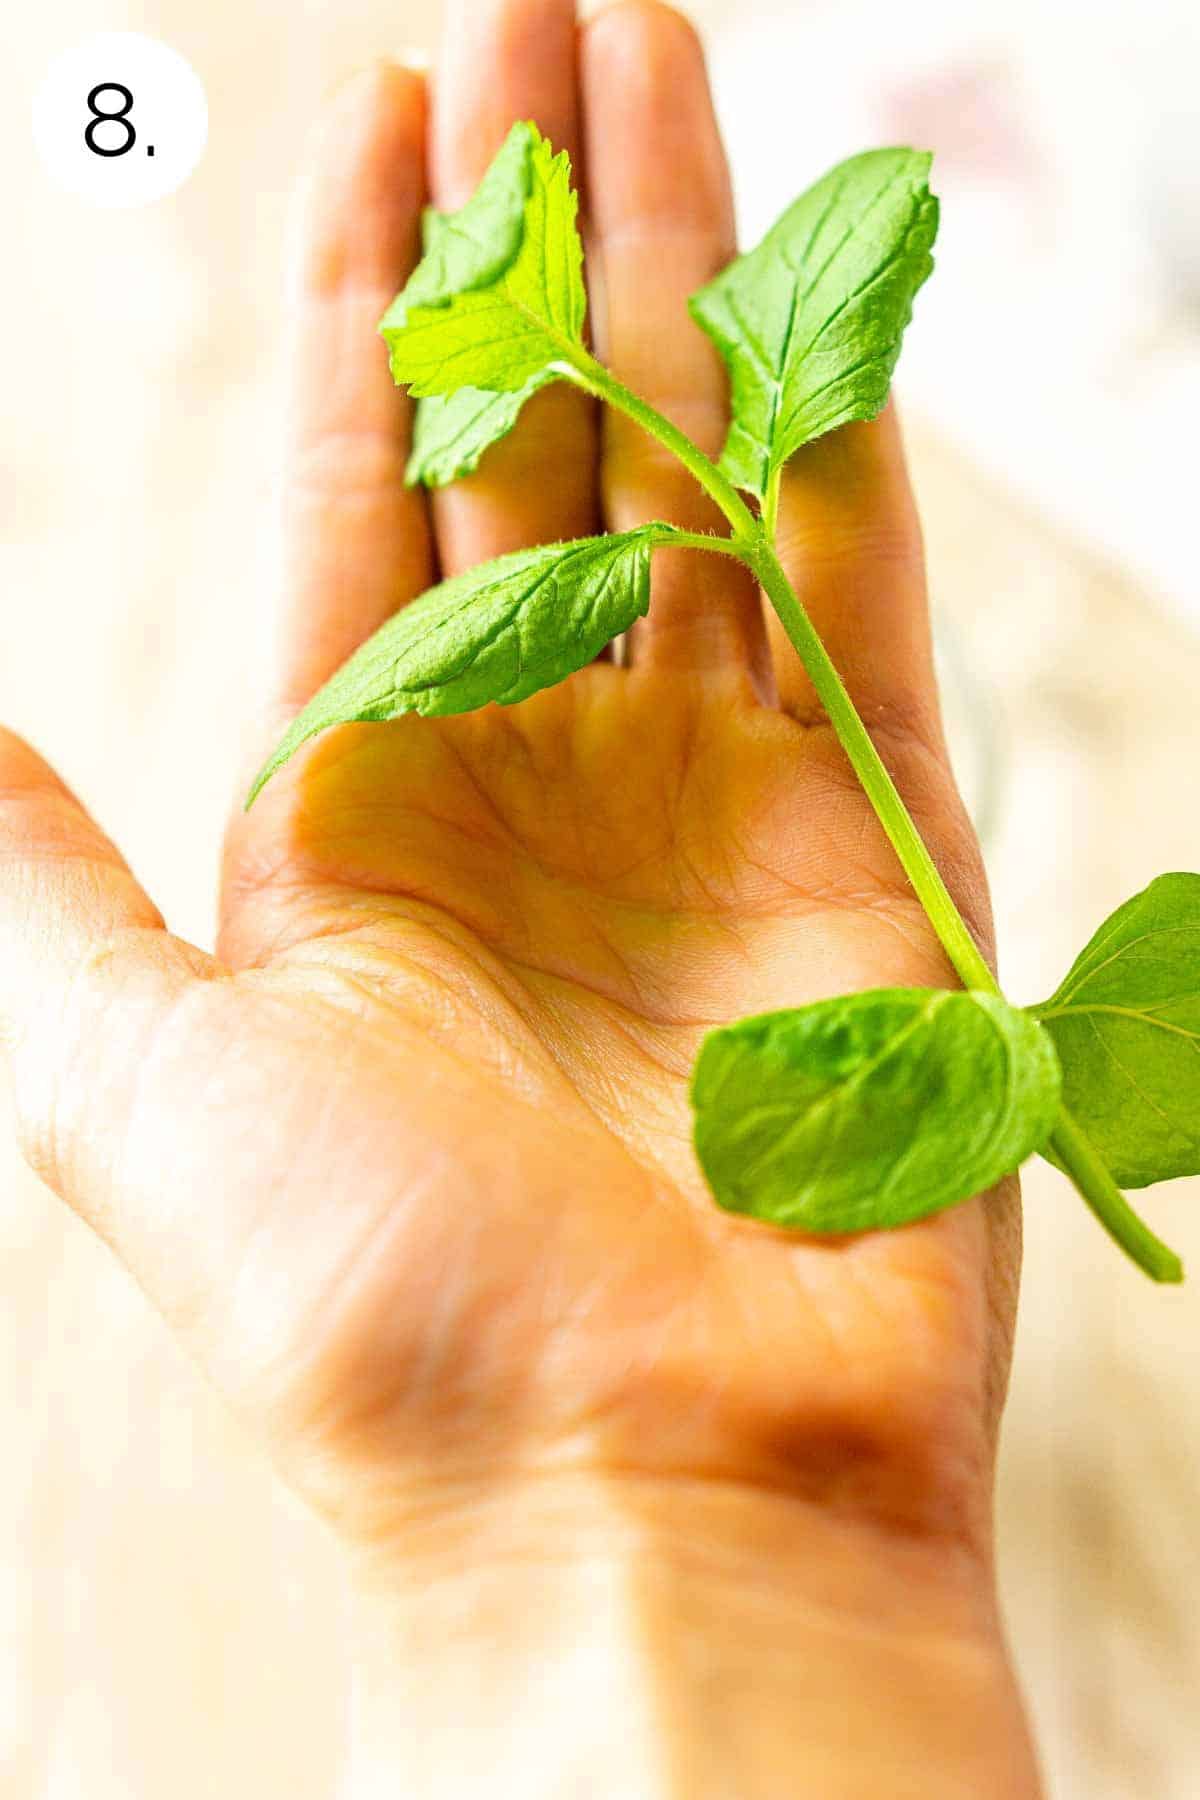 The mint in the palm of a hand before clapping over it to garnish.